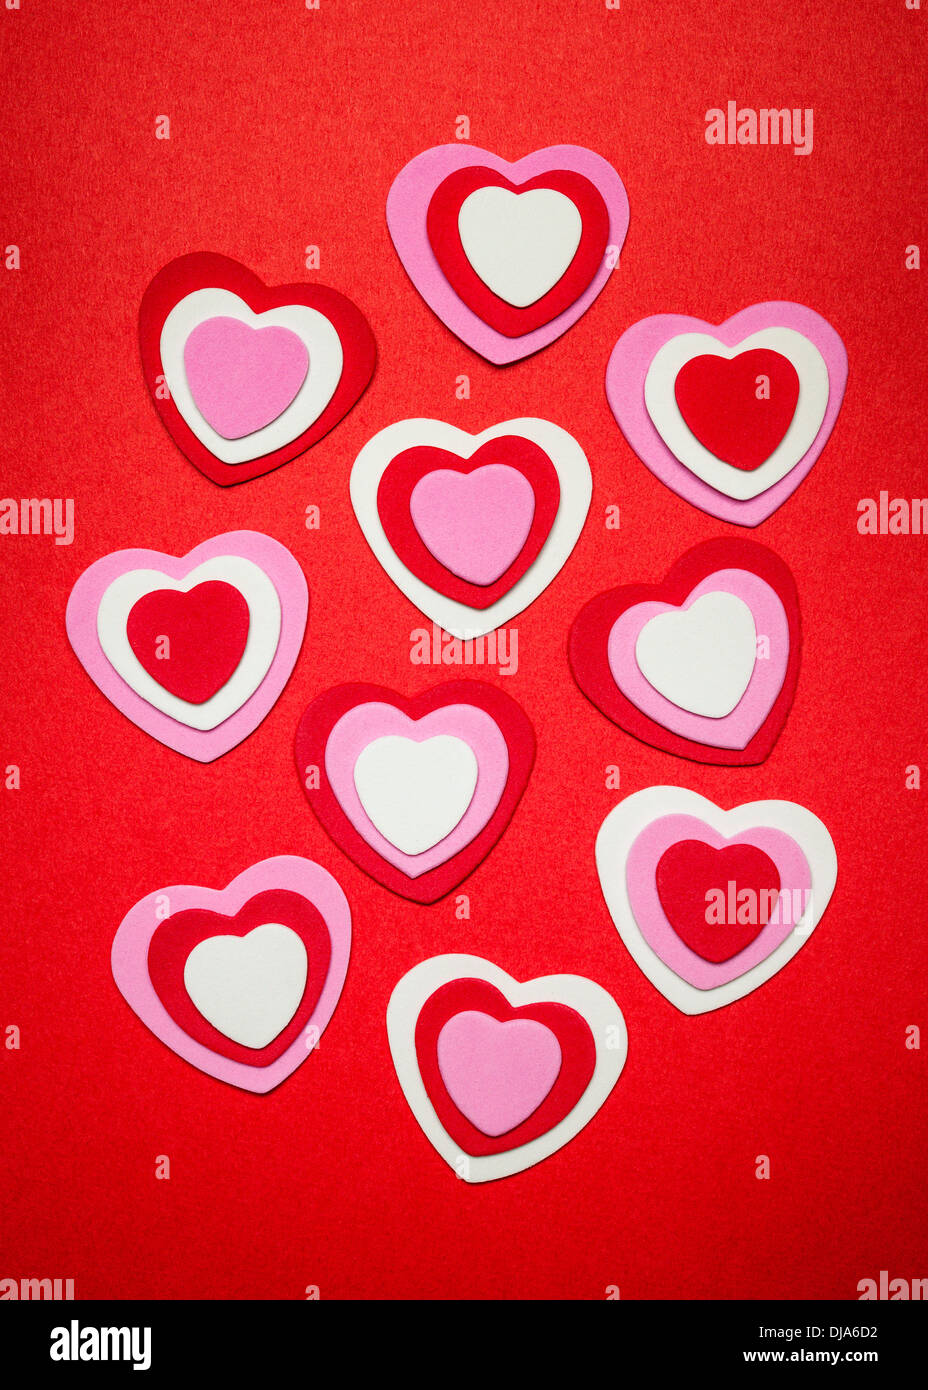 Romantic red pink and white hearts for Valentines day Stock Photo